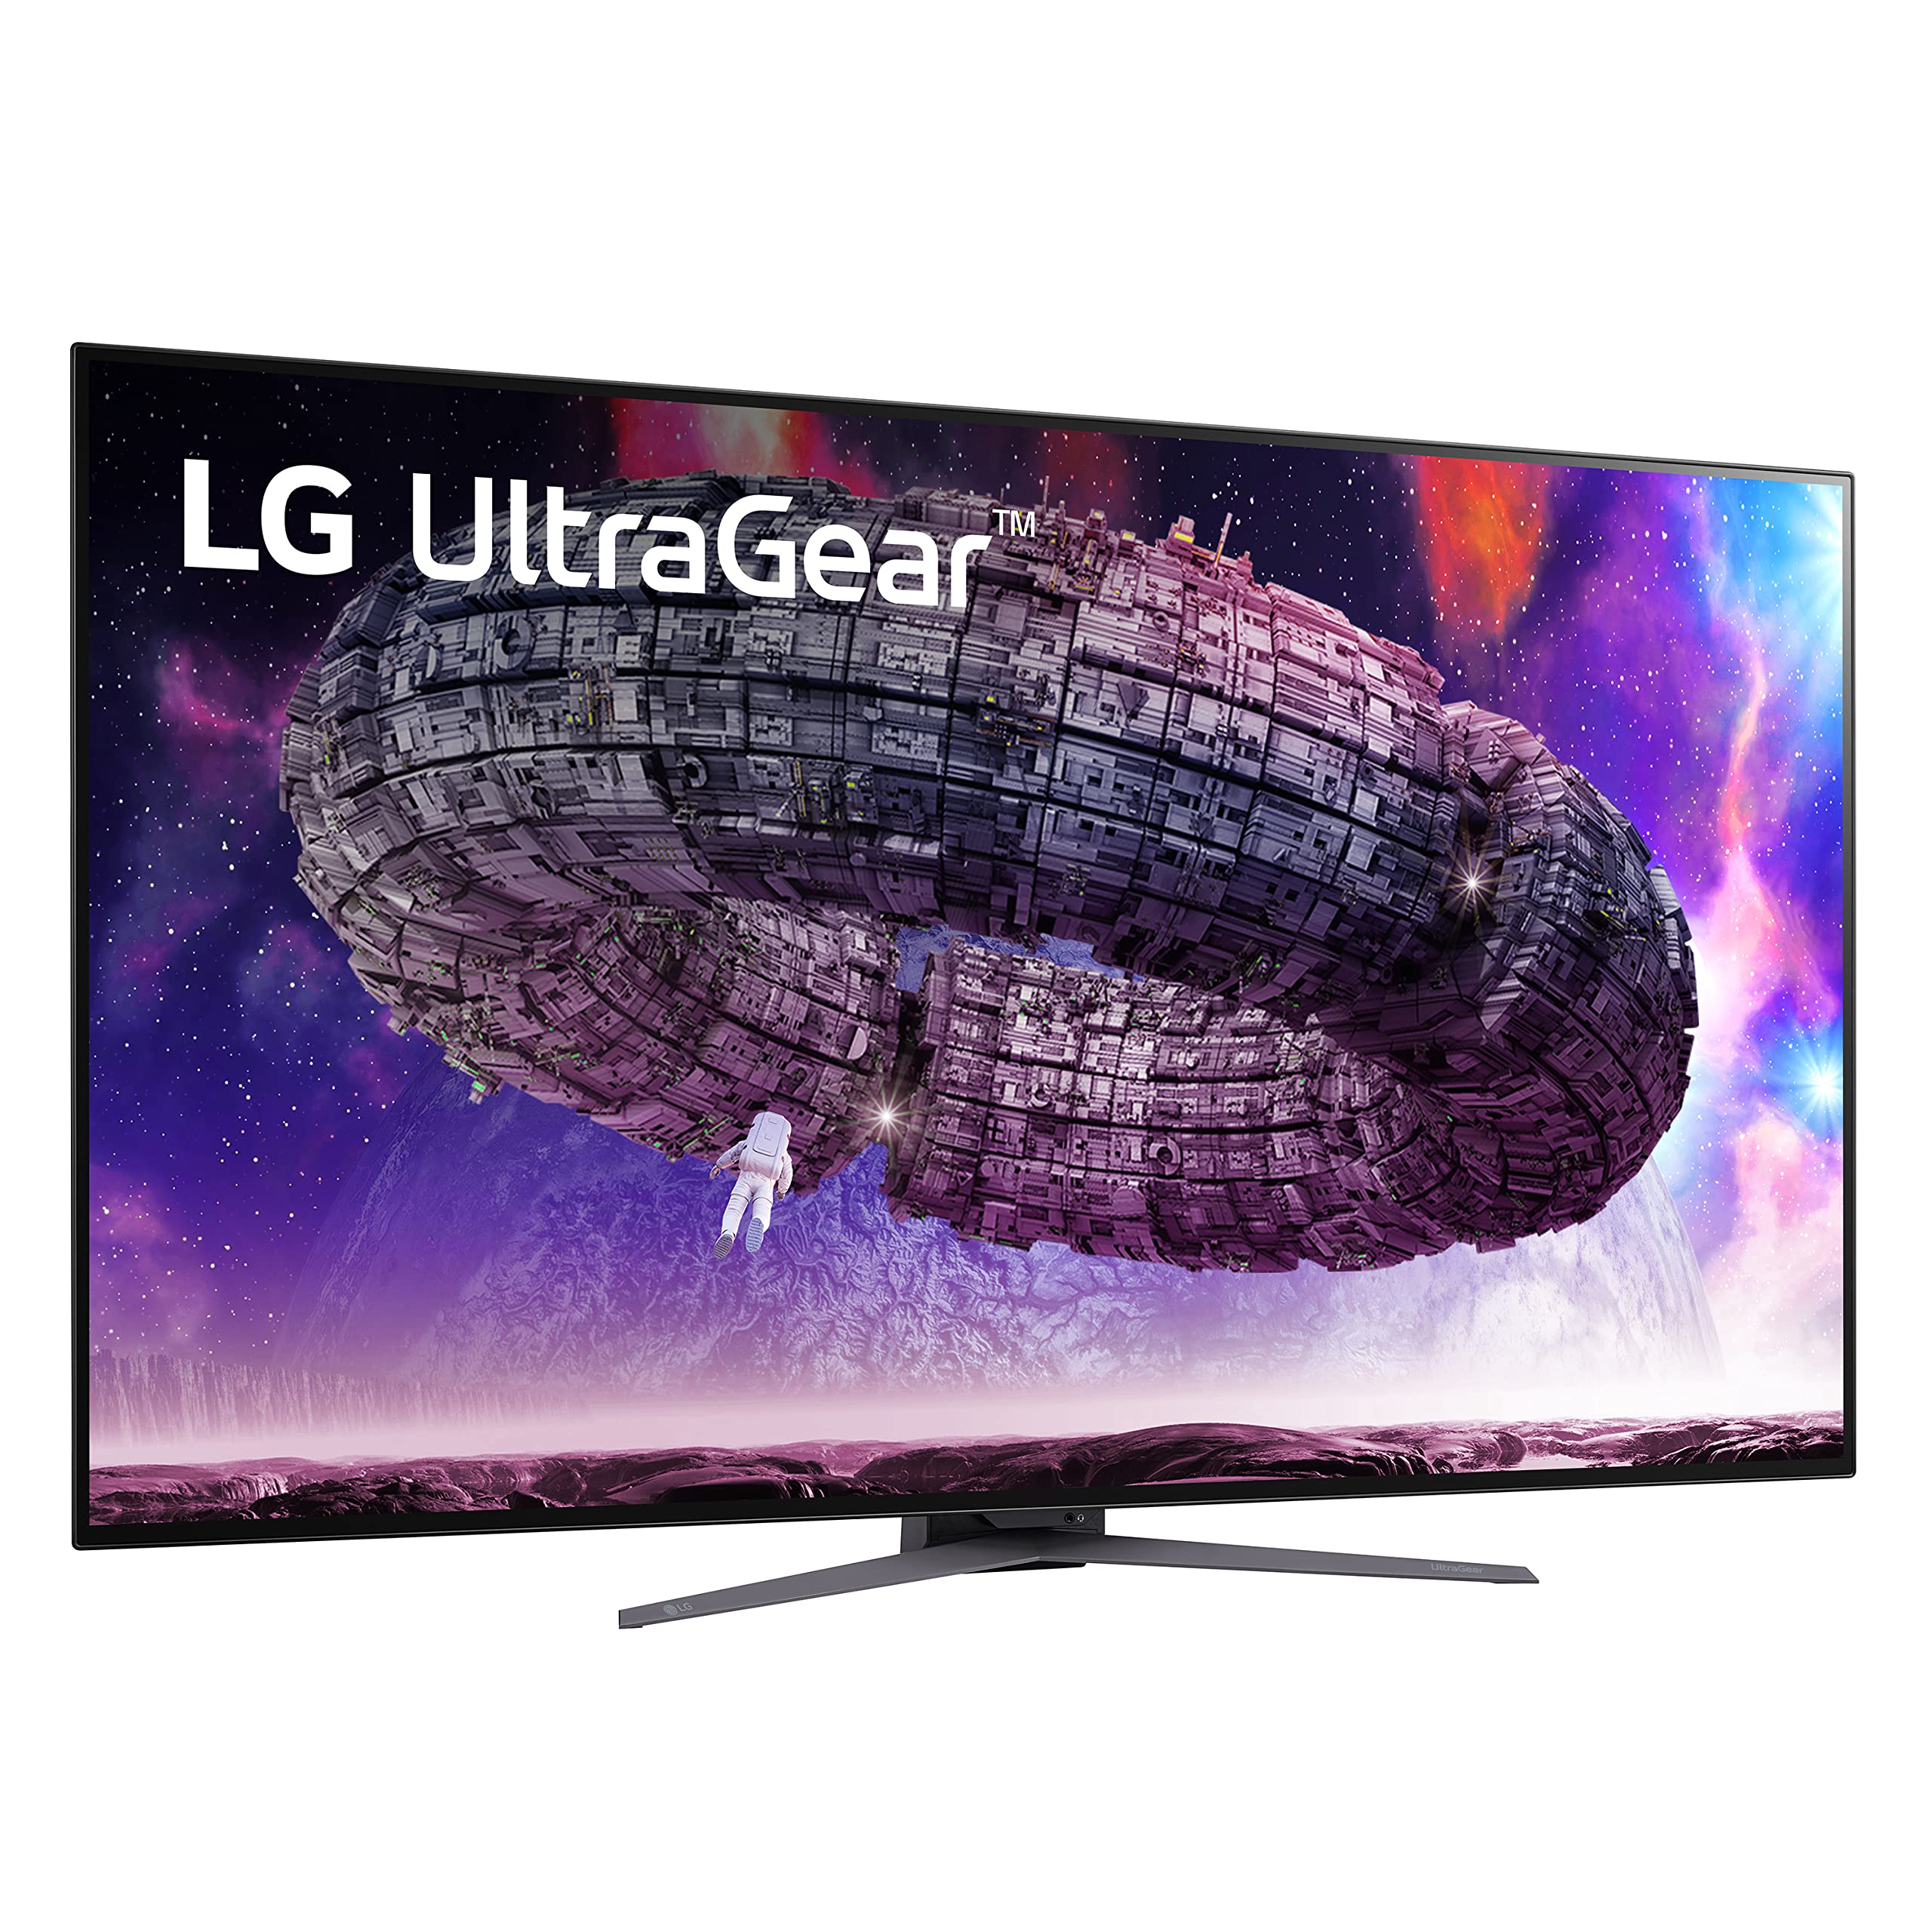 LG 48GQ900-B 48” Ultragear UHD OLED Gaming Monitor with Anti-Glare, 1.5M : 1 Contrast Ratio & DCI-P3 99% (Typ.) with HDR 10, .1ms (GtG) 120Hz Refresh Rate, HDMI 2.1,Black